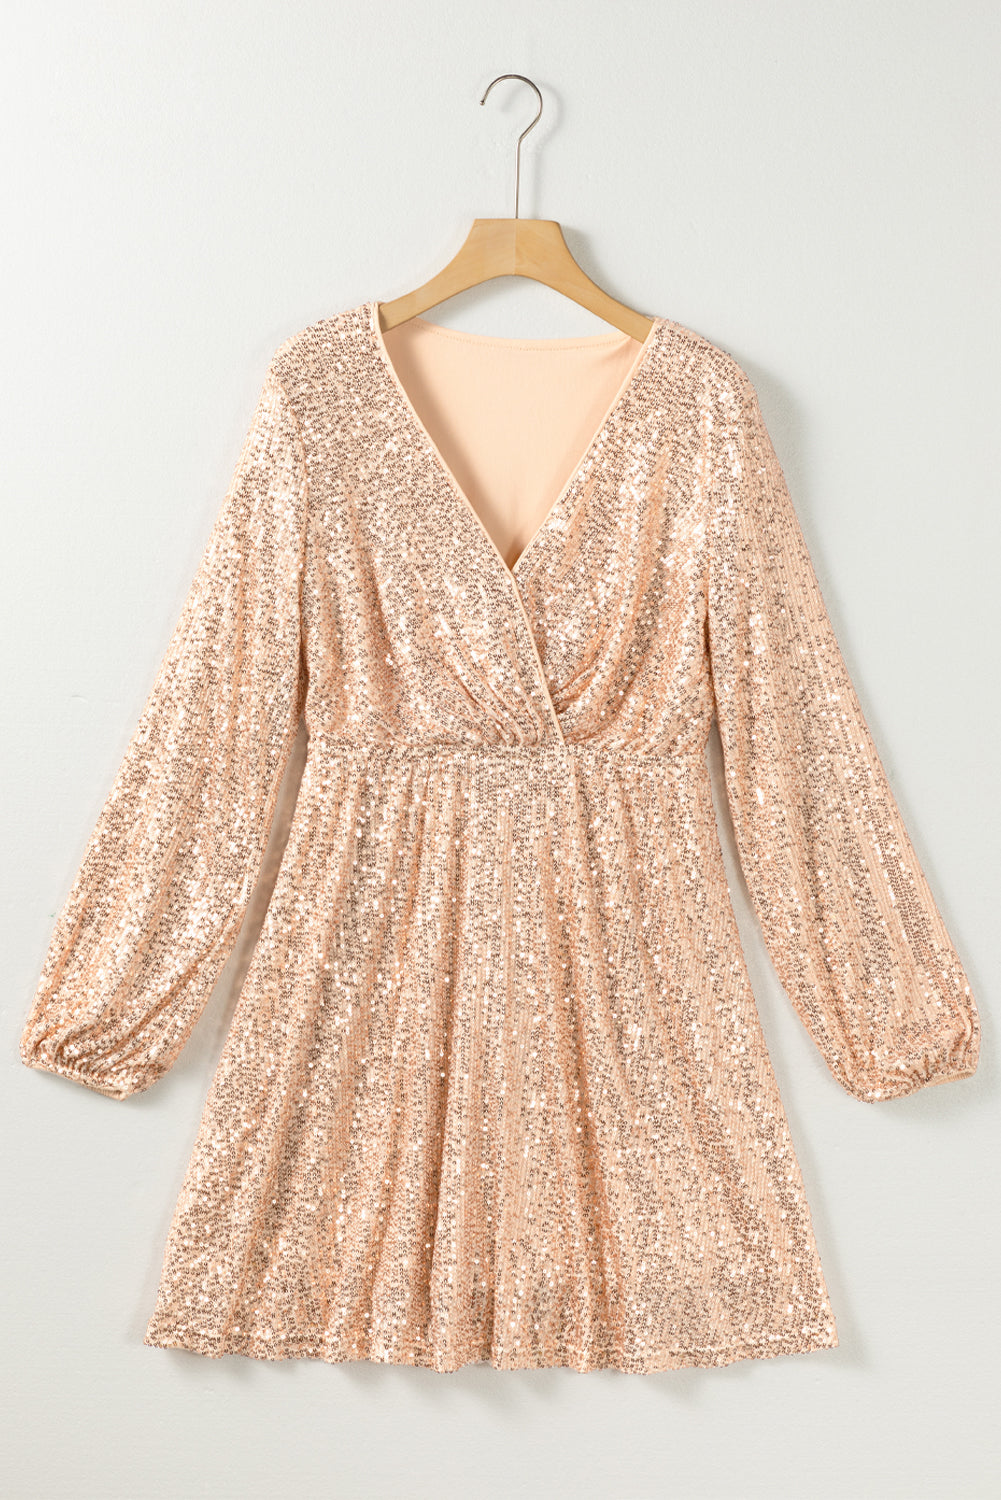 Apricot Wrapped V-neck Sequin Dress